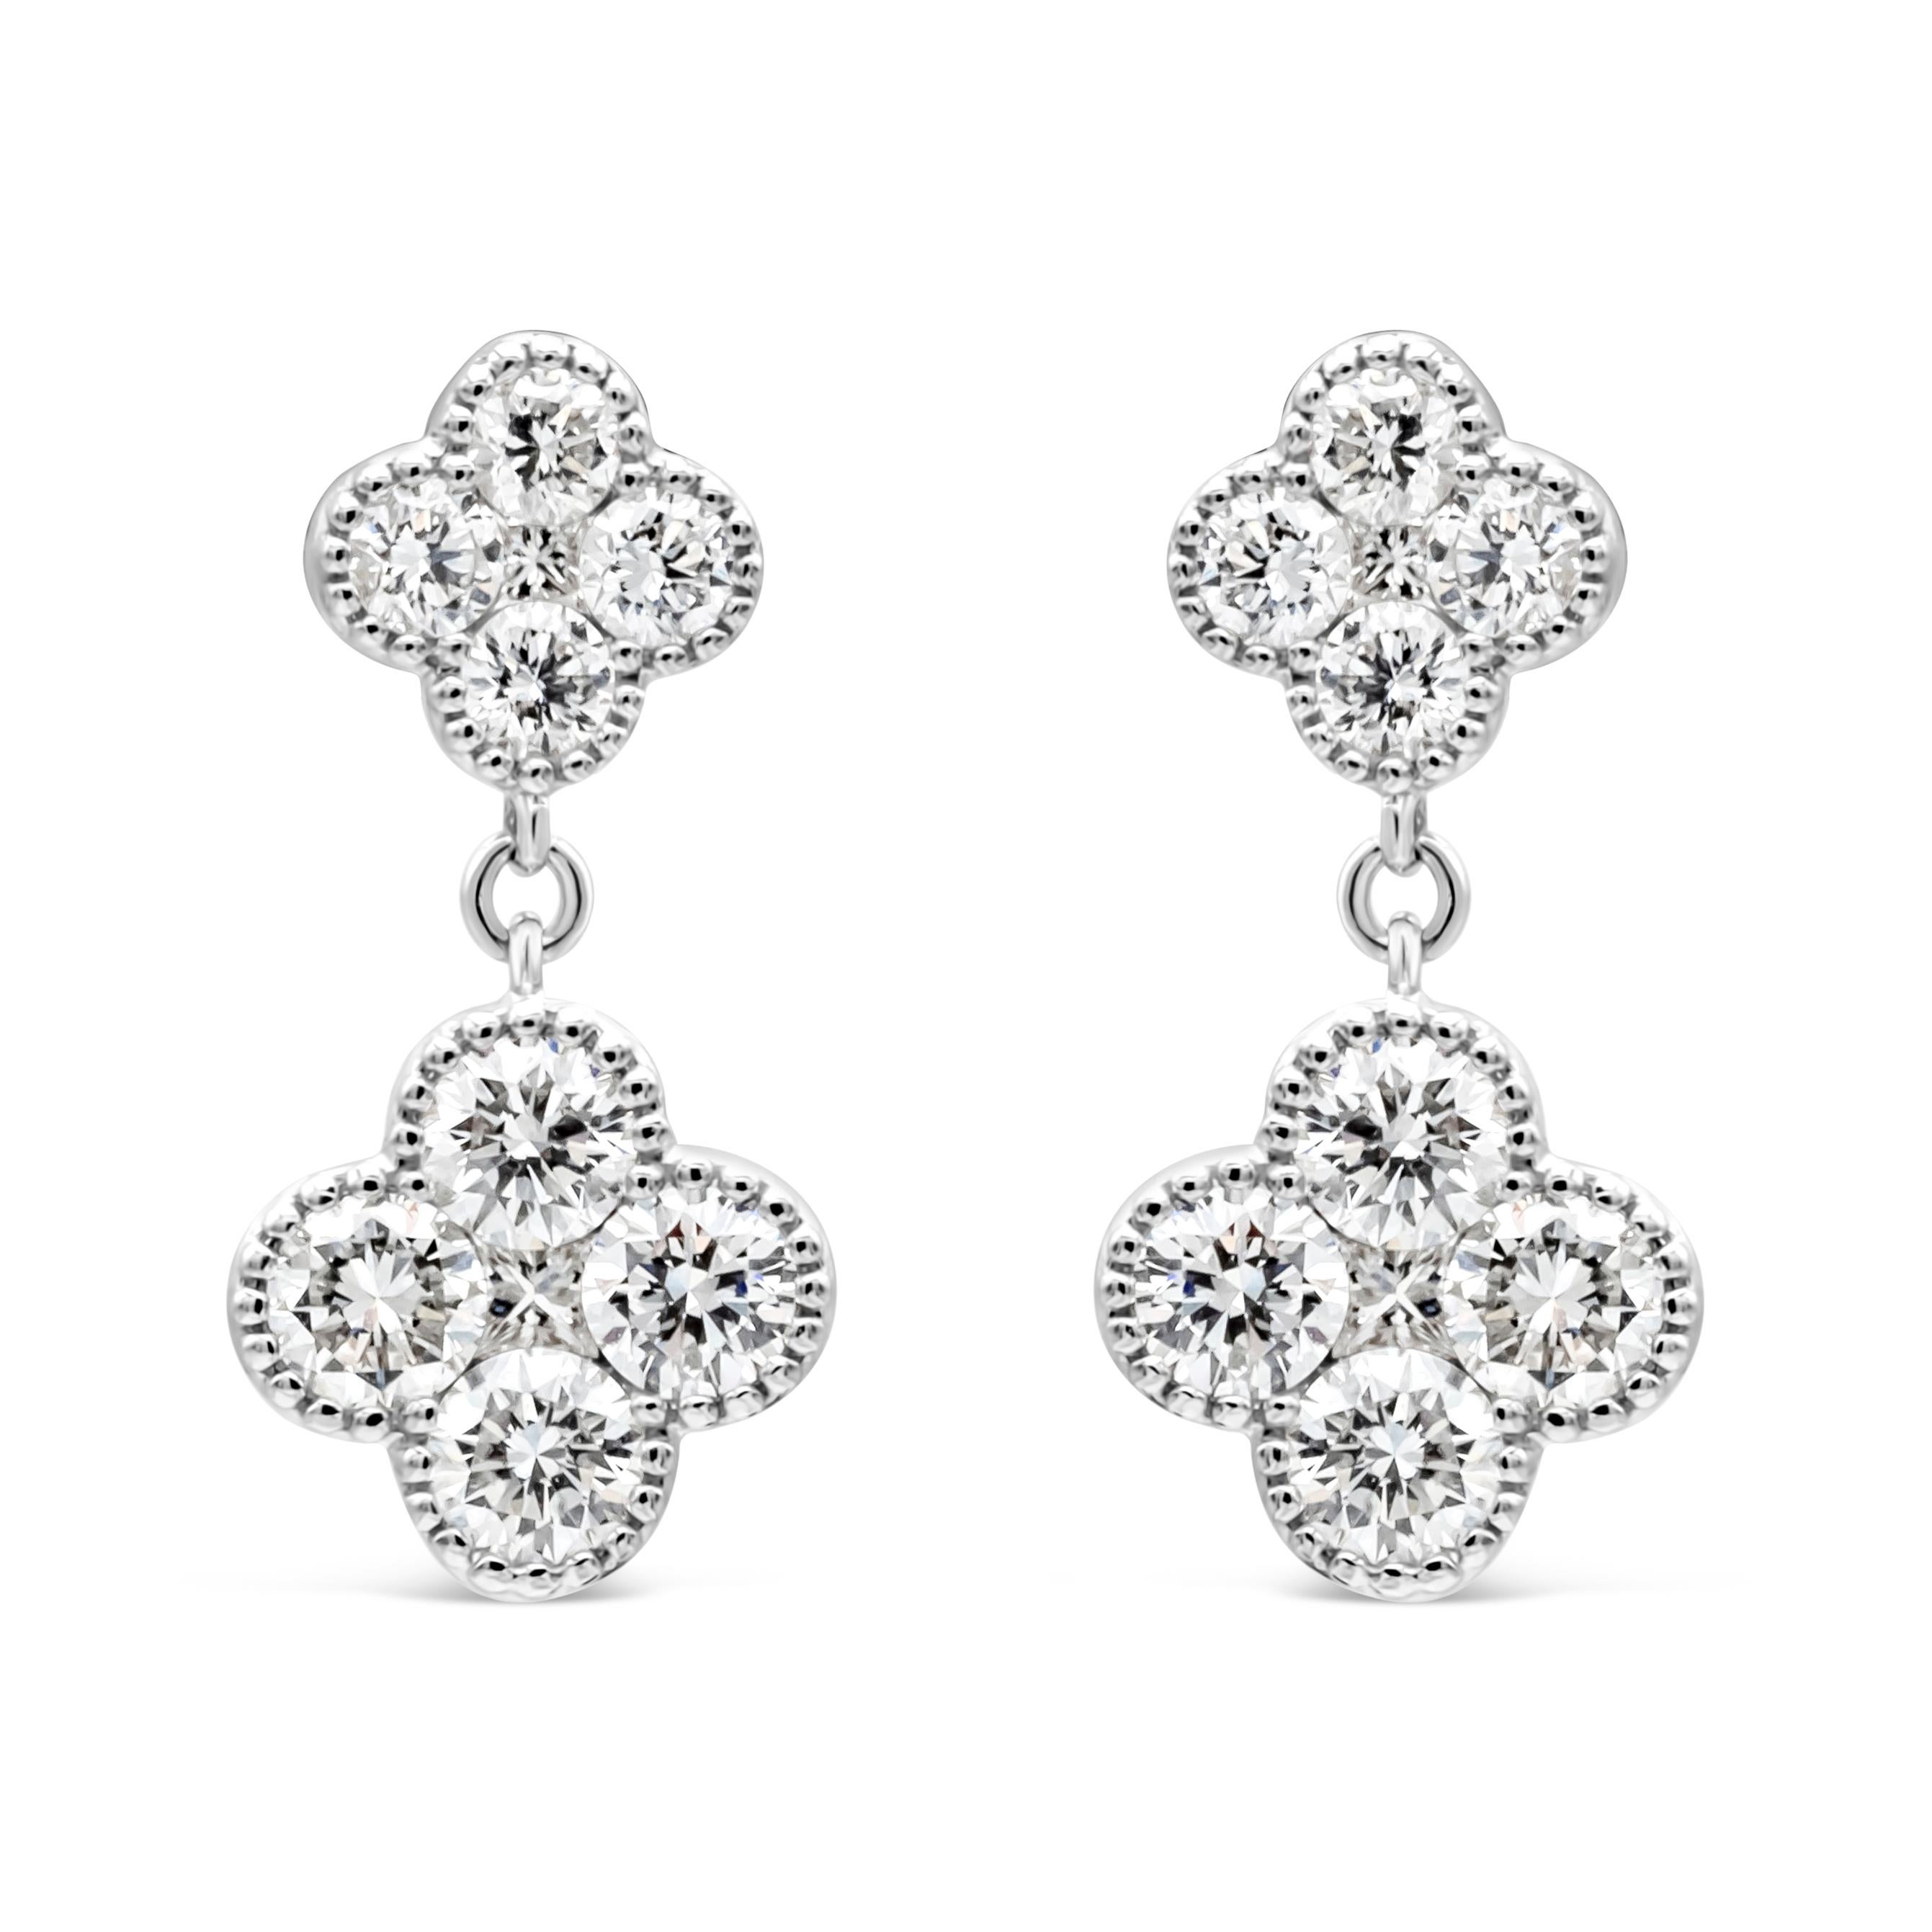 Elegant and chic classic drop earrings showcasing a two beautiful clover design round cut diamonds, suspended on an another brilliant round diamonds set in a clover design. Diamonds weigh 1.48 carats total, F color and VS in clarity. Finely made in